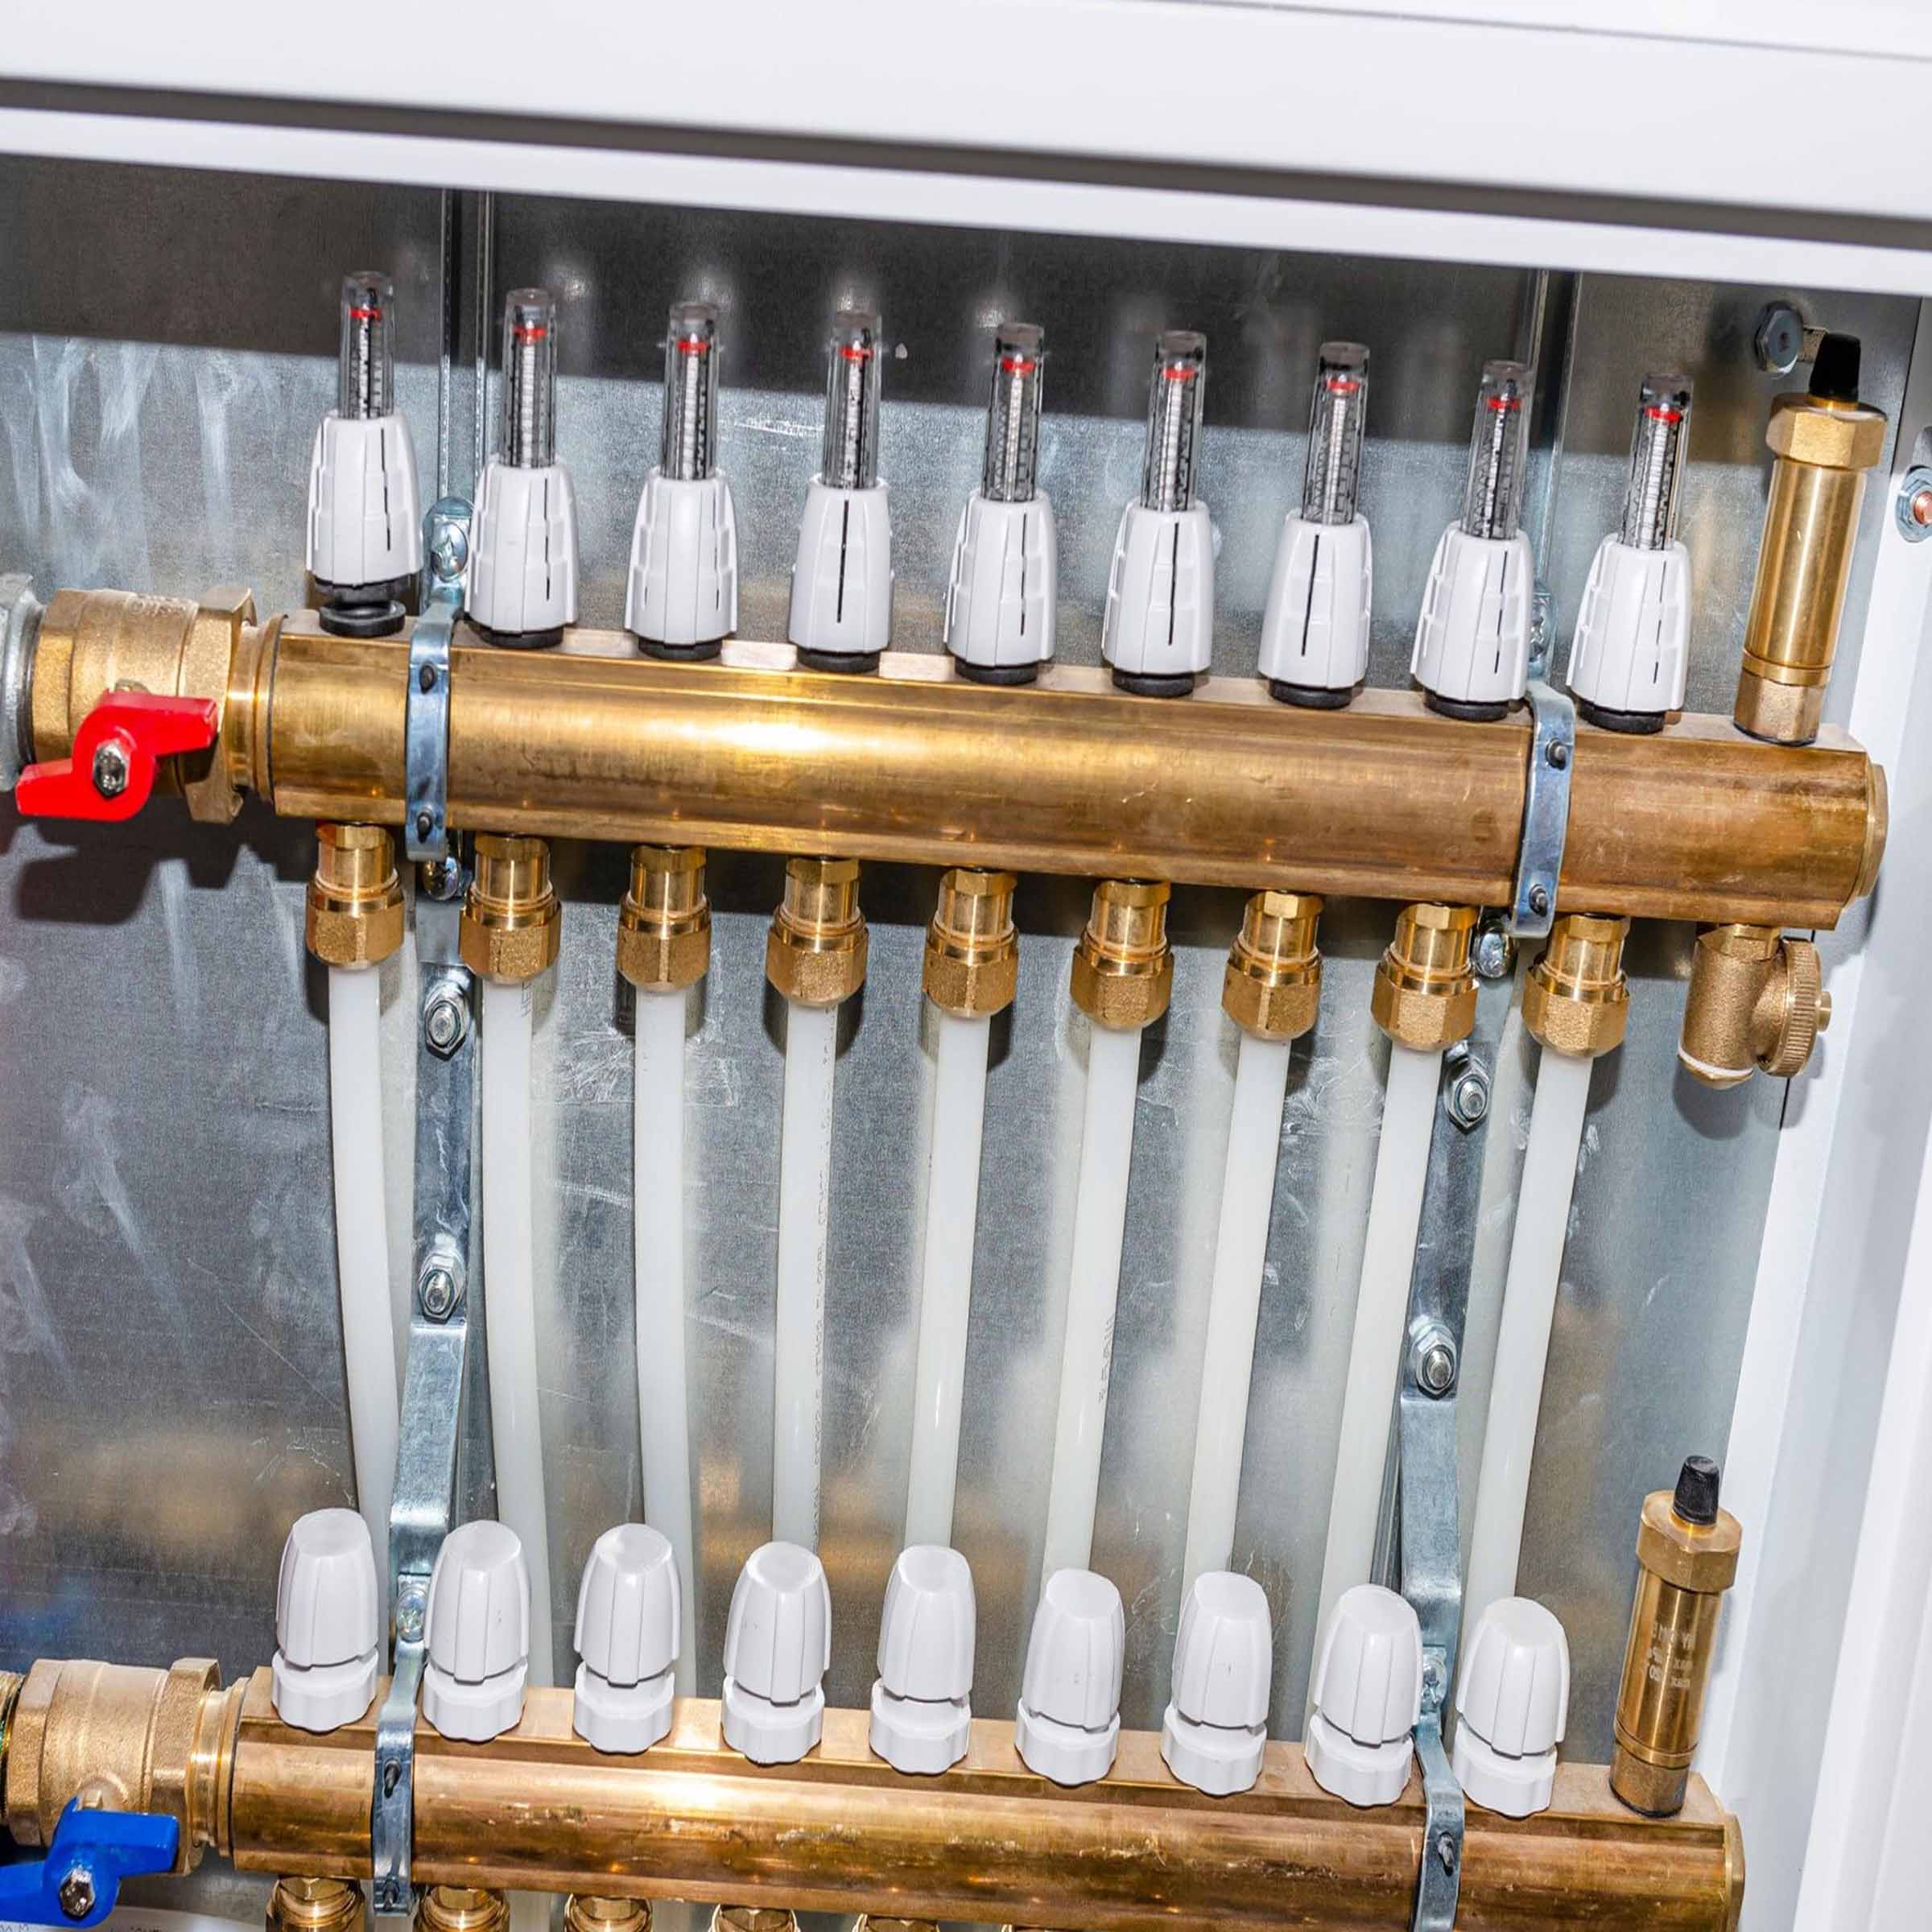 Can You Install Opentherm On A Boiler